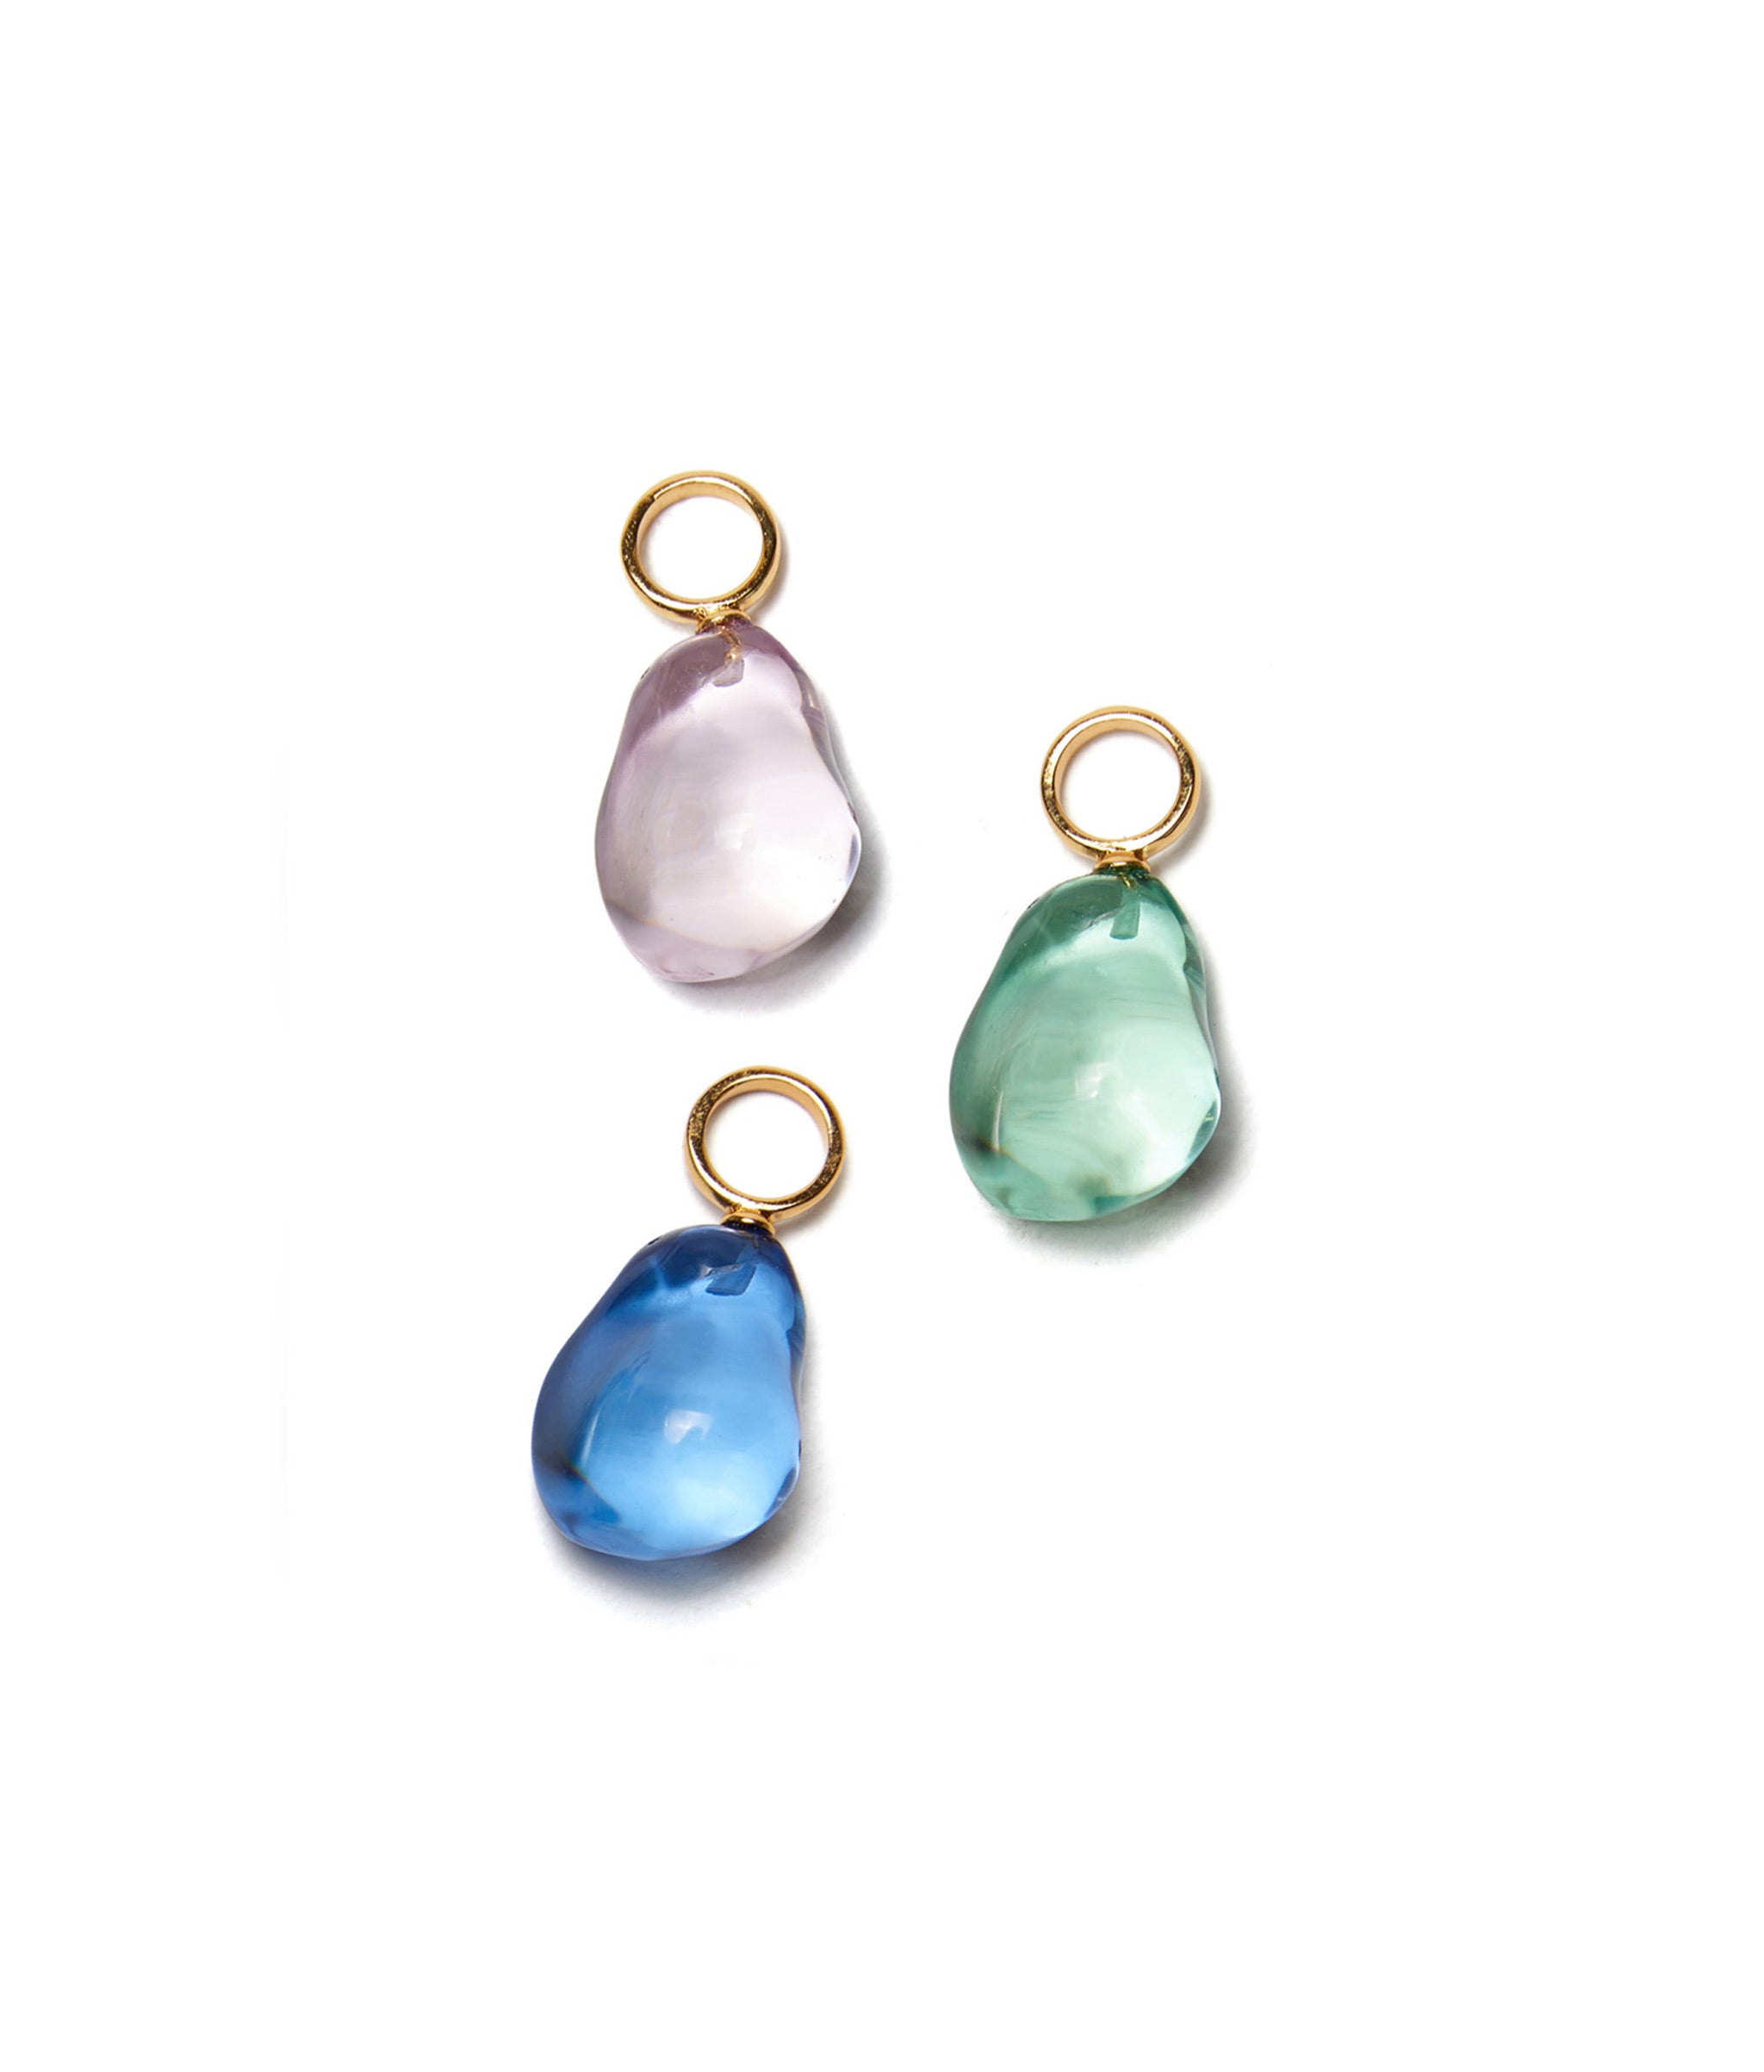 Island Hopper Charms in Lavender, Blue, and Moss. Charms in abstract pearl-shaped acrylic with gold-plated brass ring.